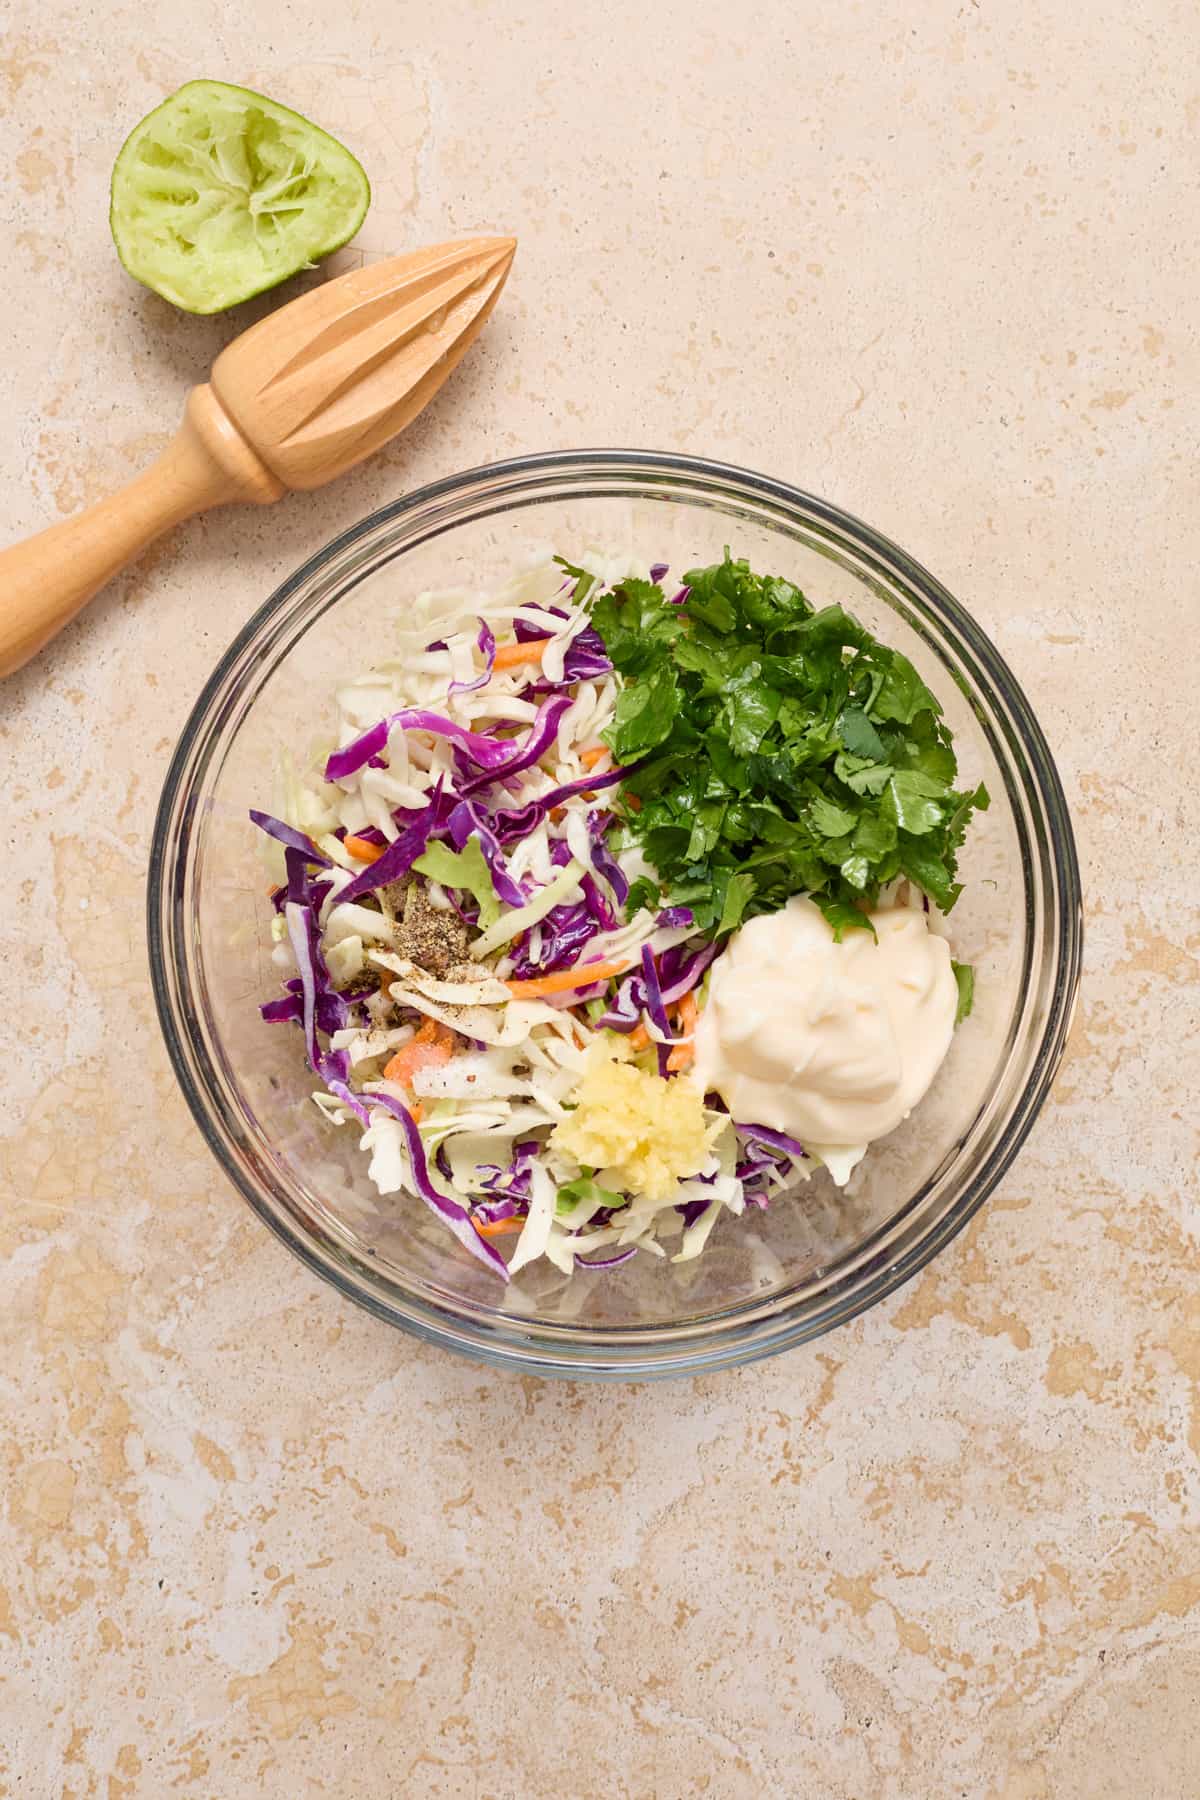 Cilantro lime slaw ingredients in glass mixing bowl.